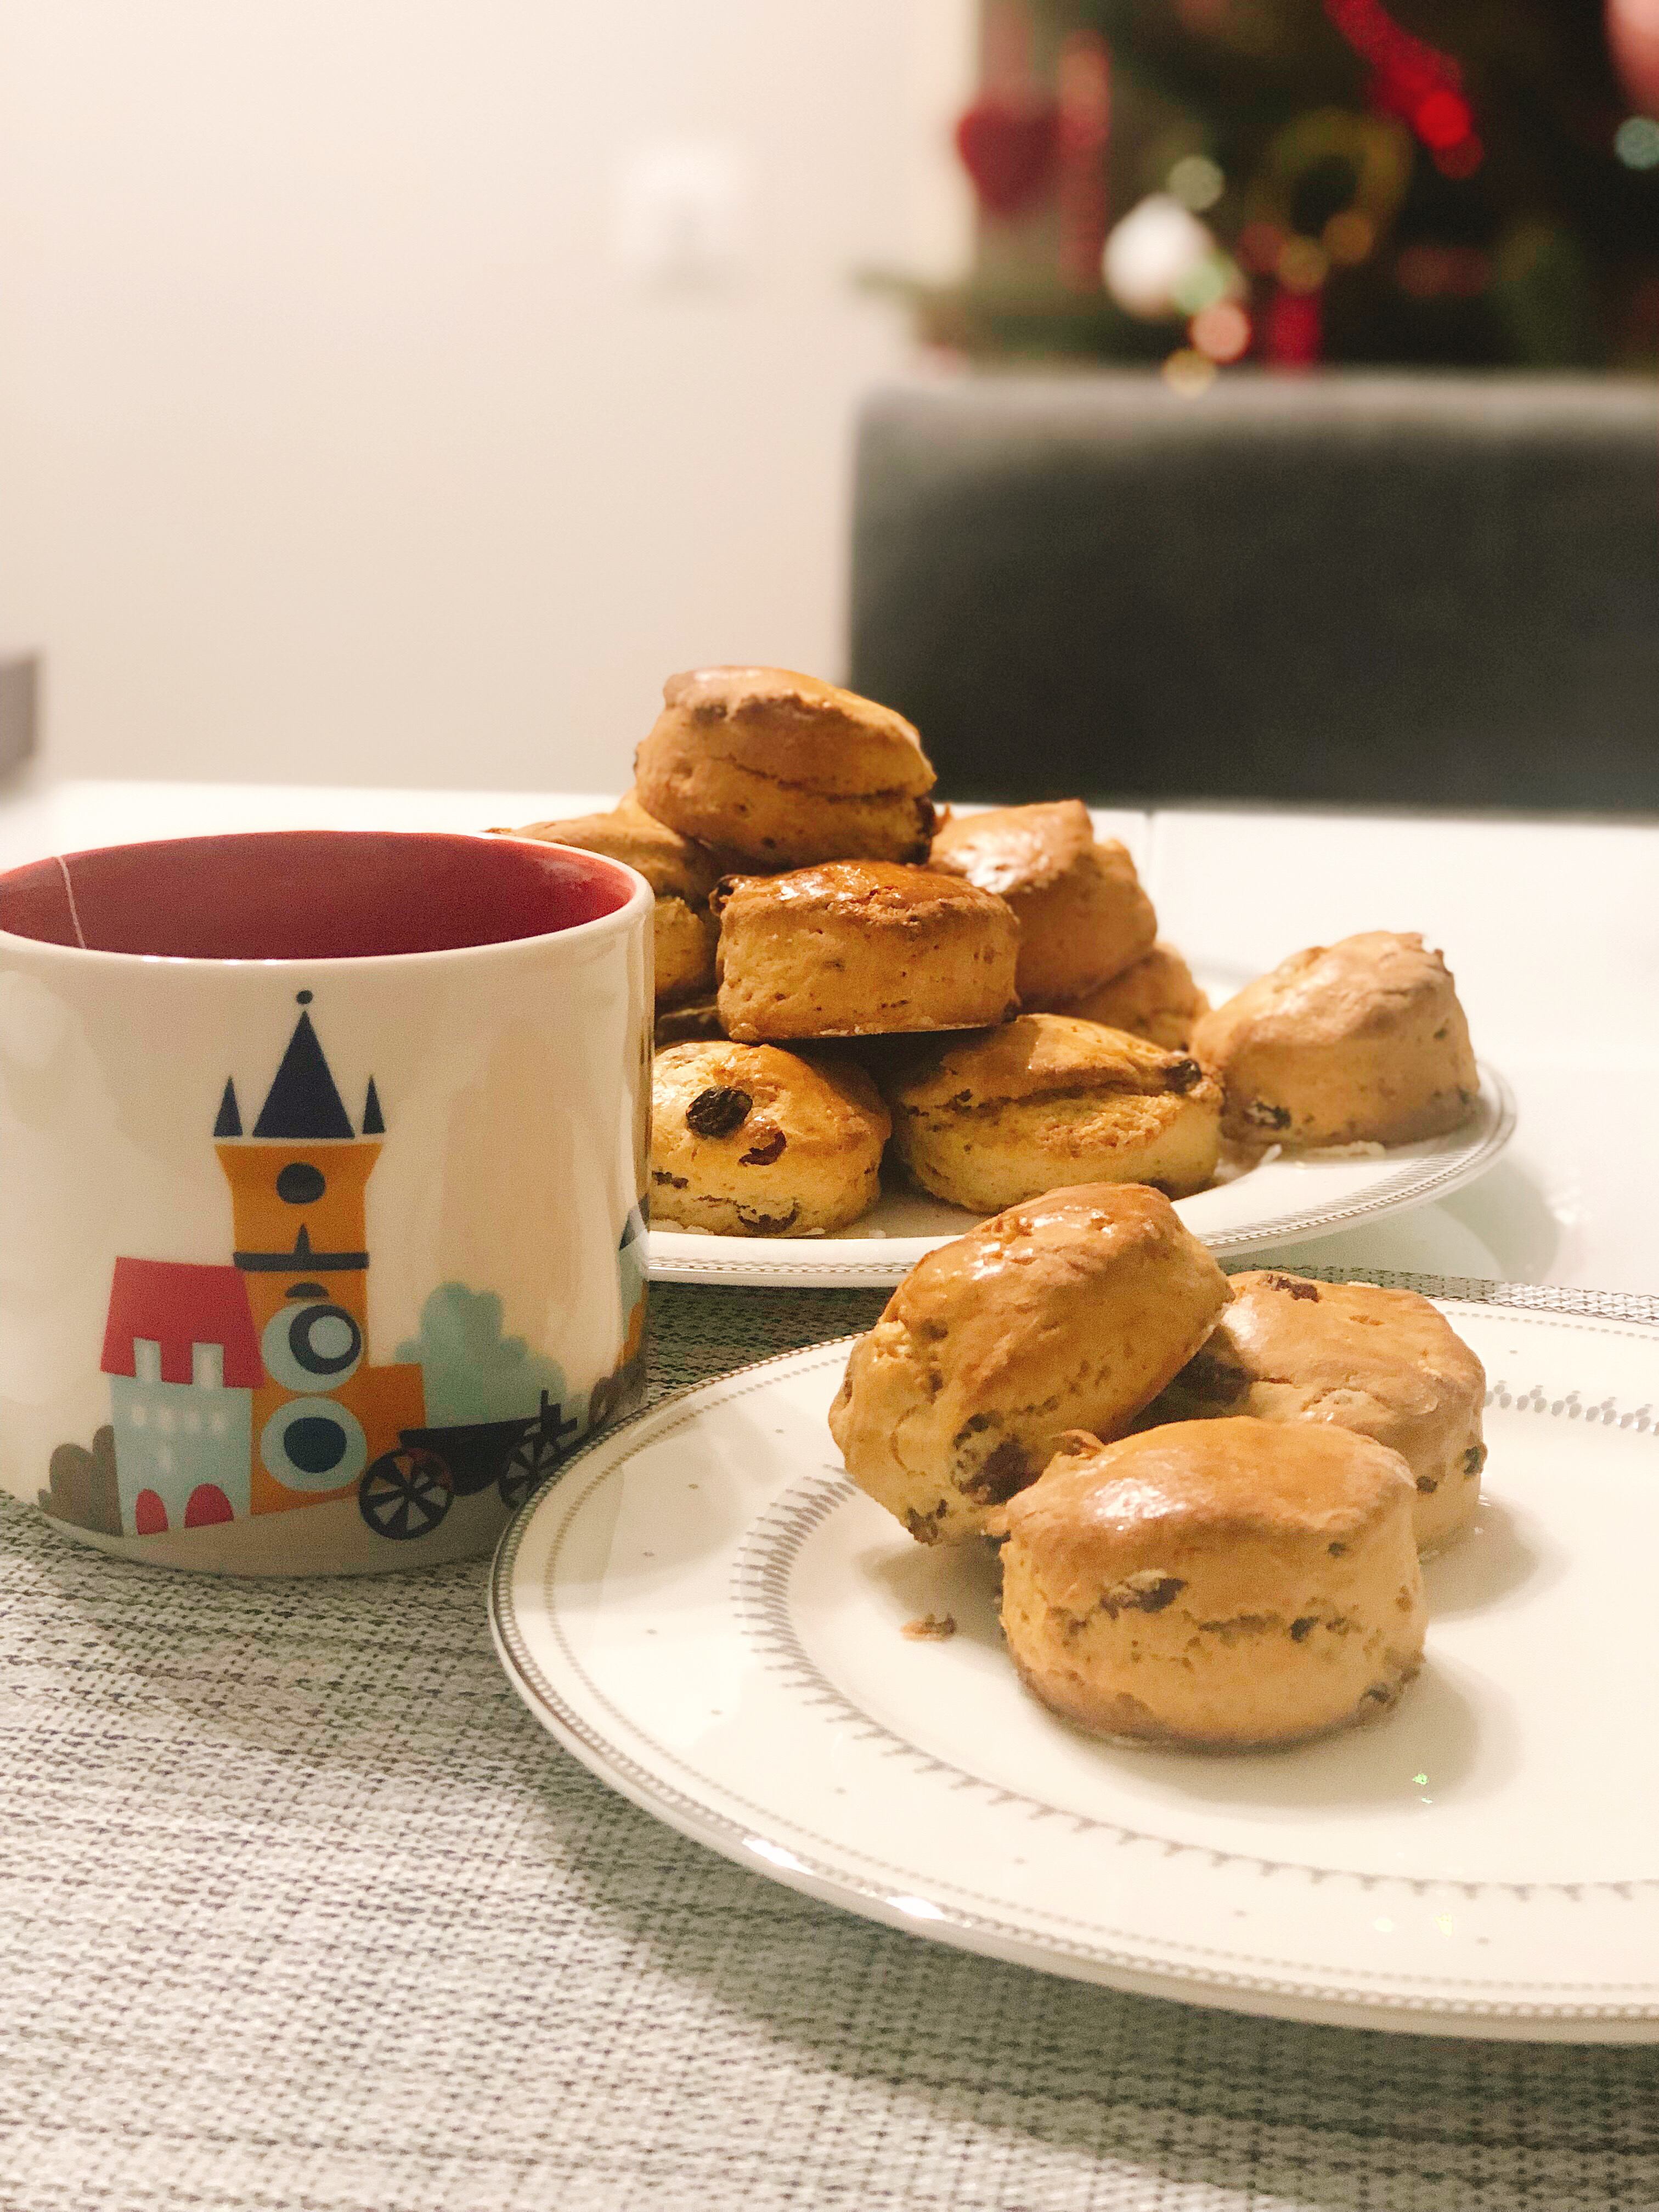 Baked home made scones with tea